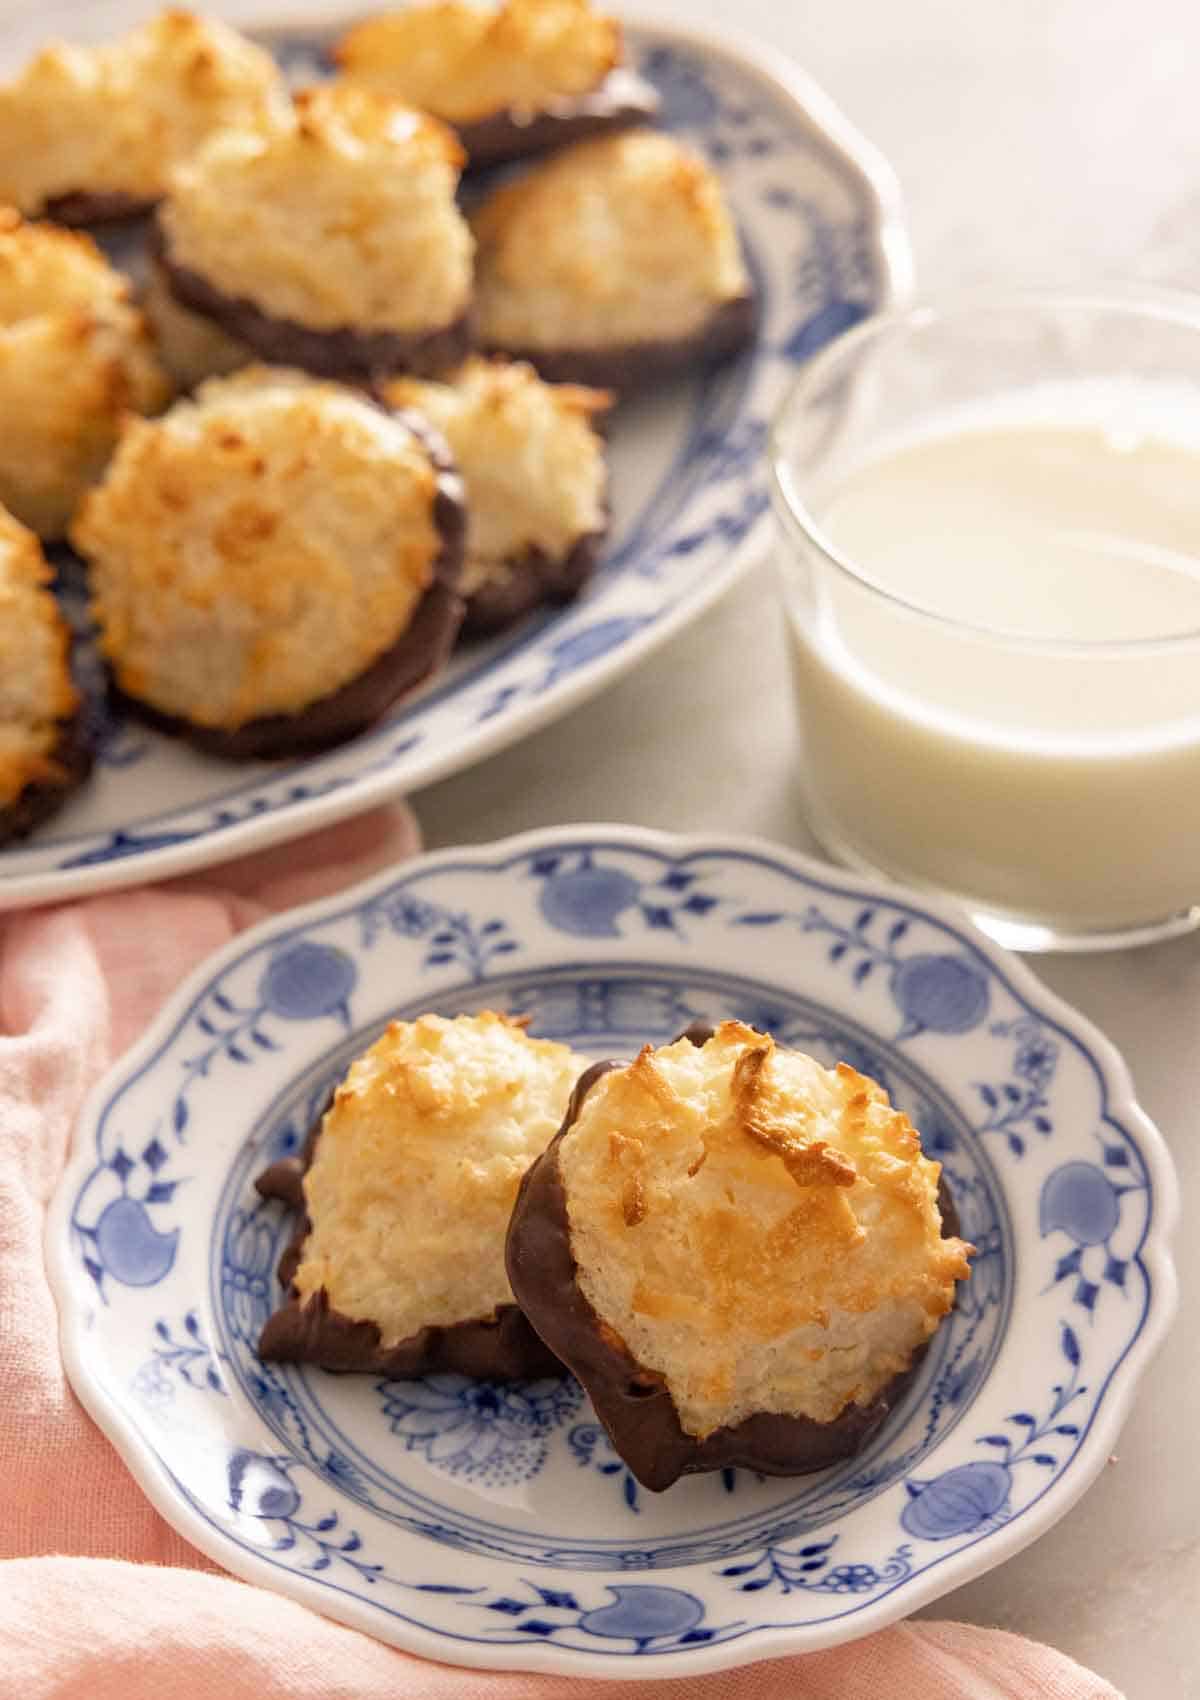 A plate with two coconut macaroons in front of a glass of milk and a platter.